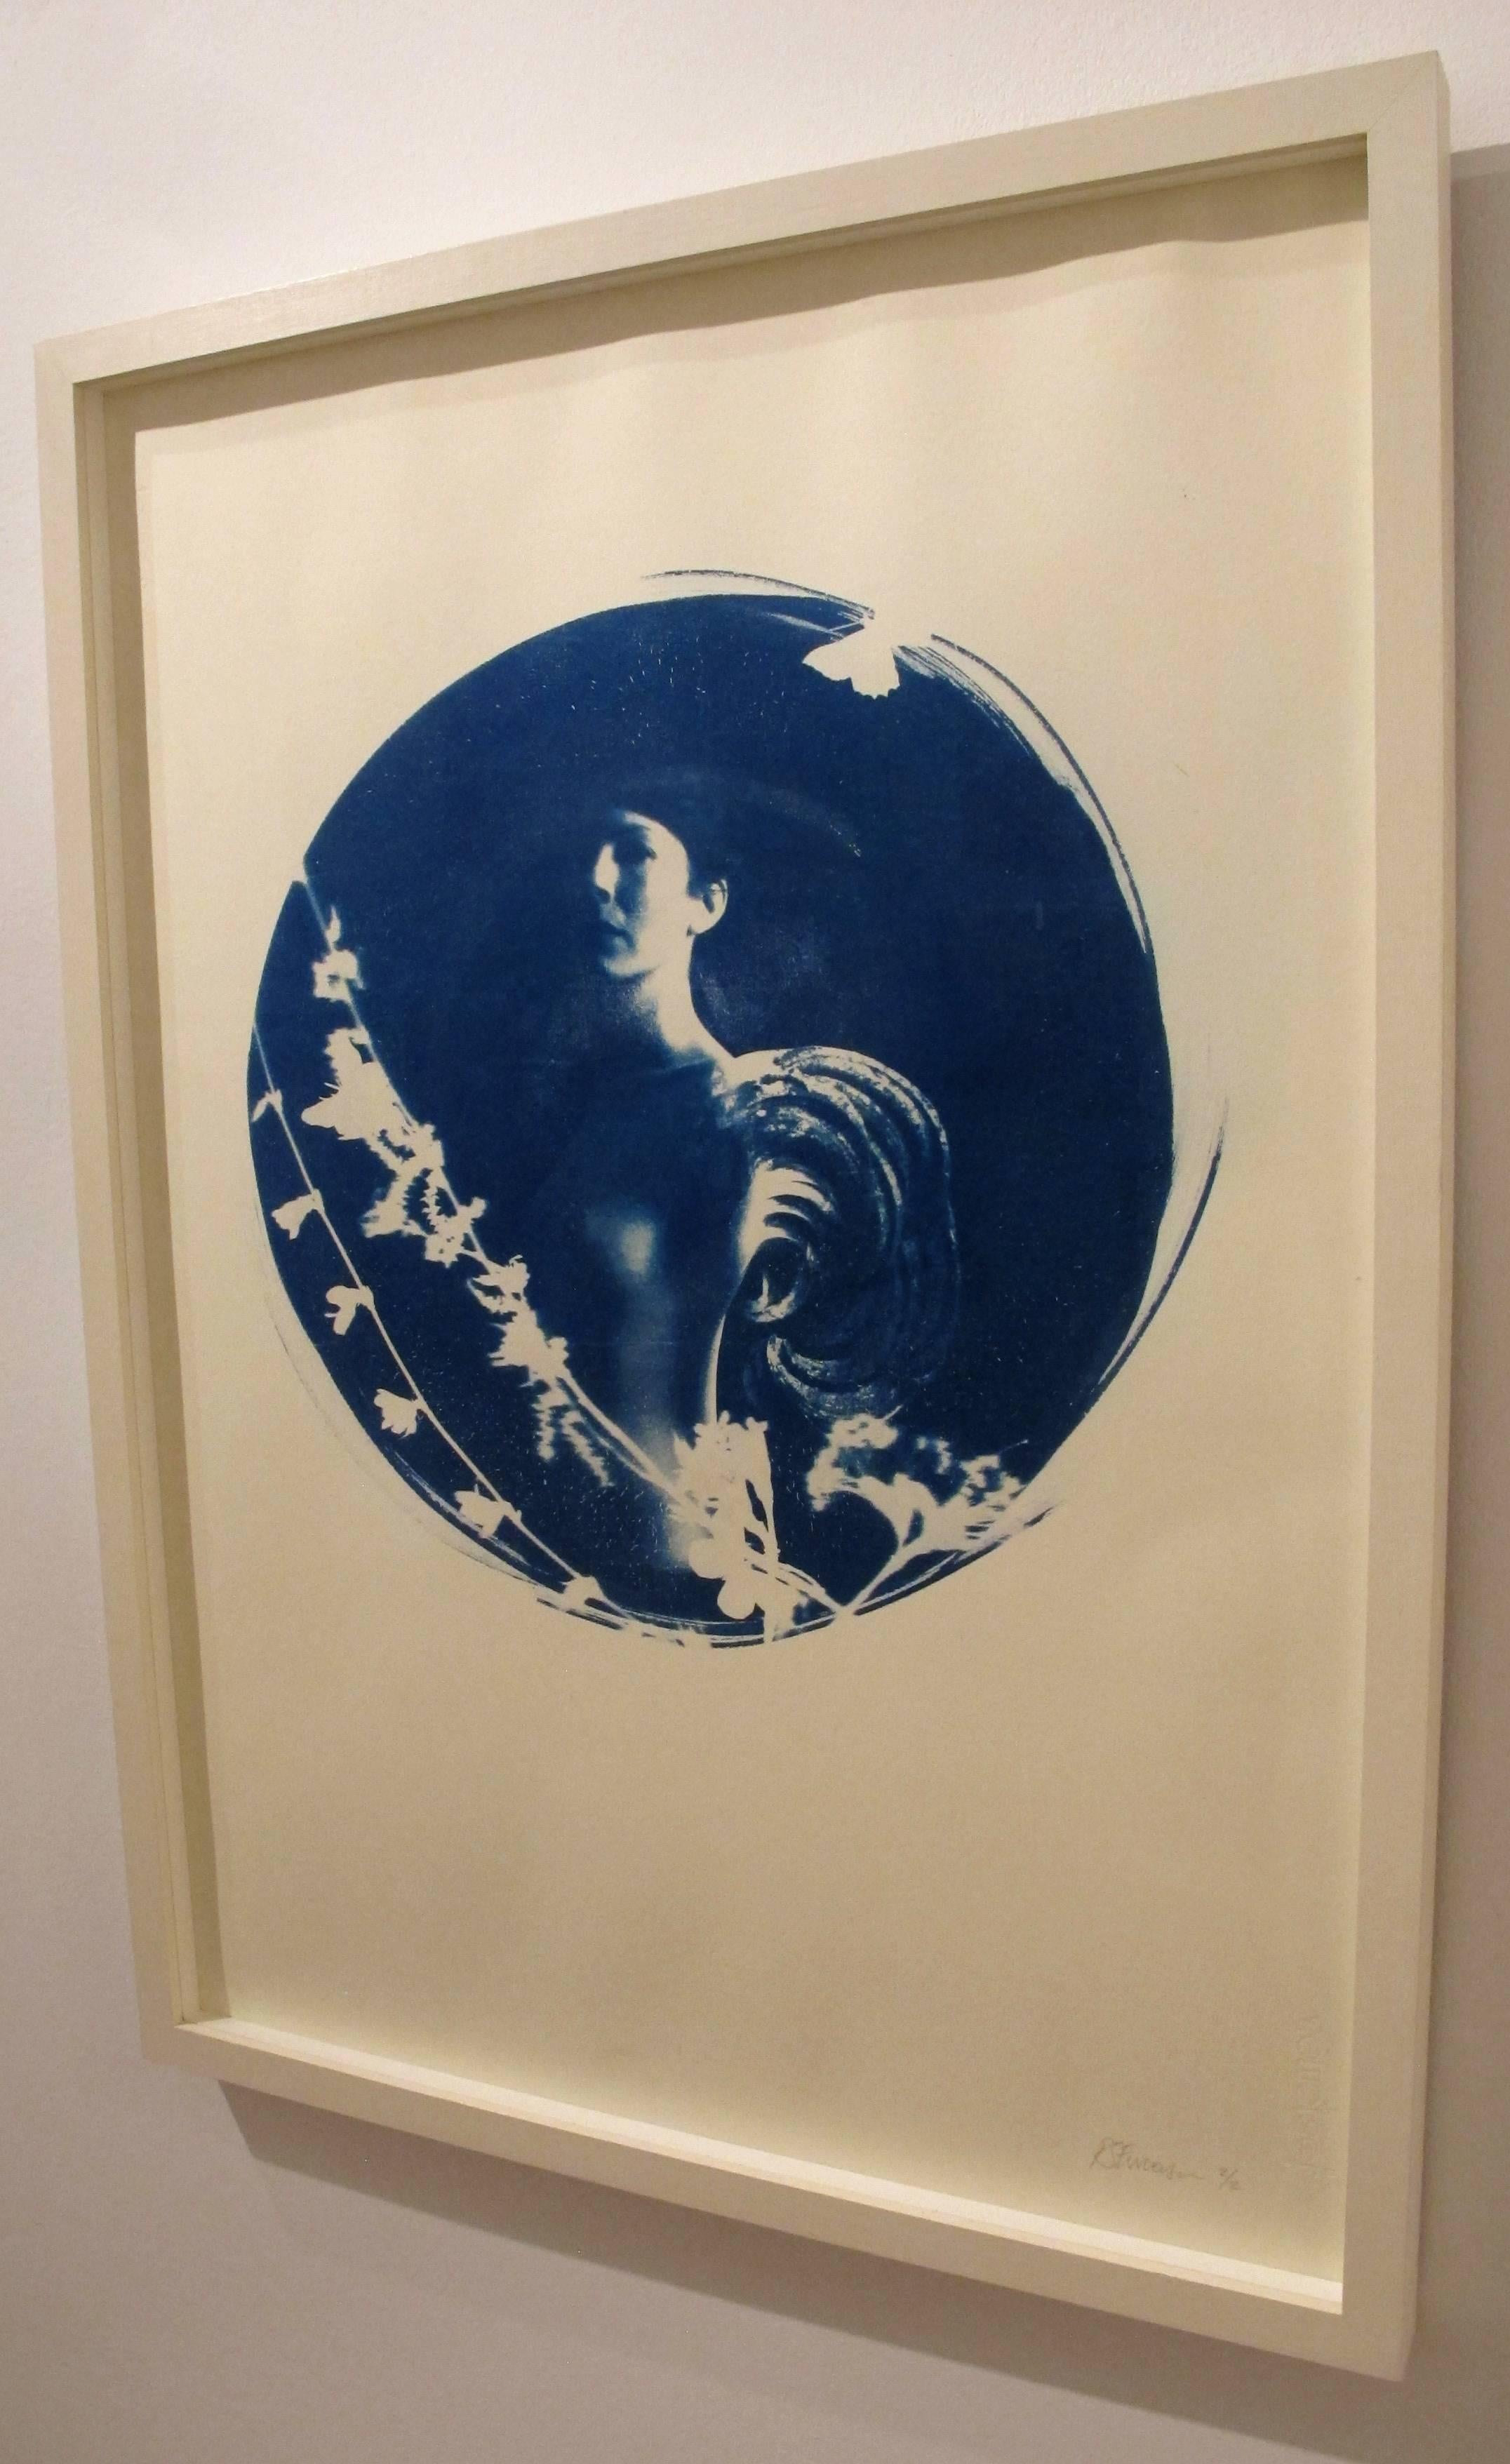 Aquila, Round cyanotype on paper, white box frame, romantic vintage looking nude - Photograph by Rosie Emerson